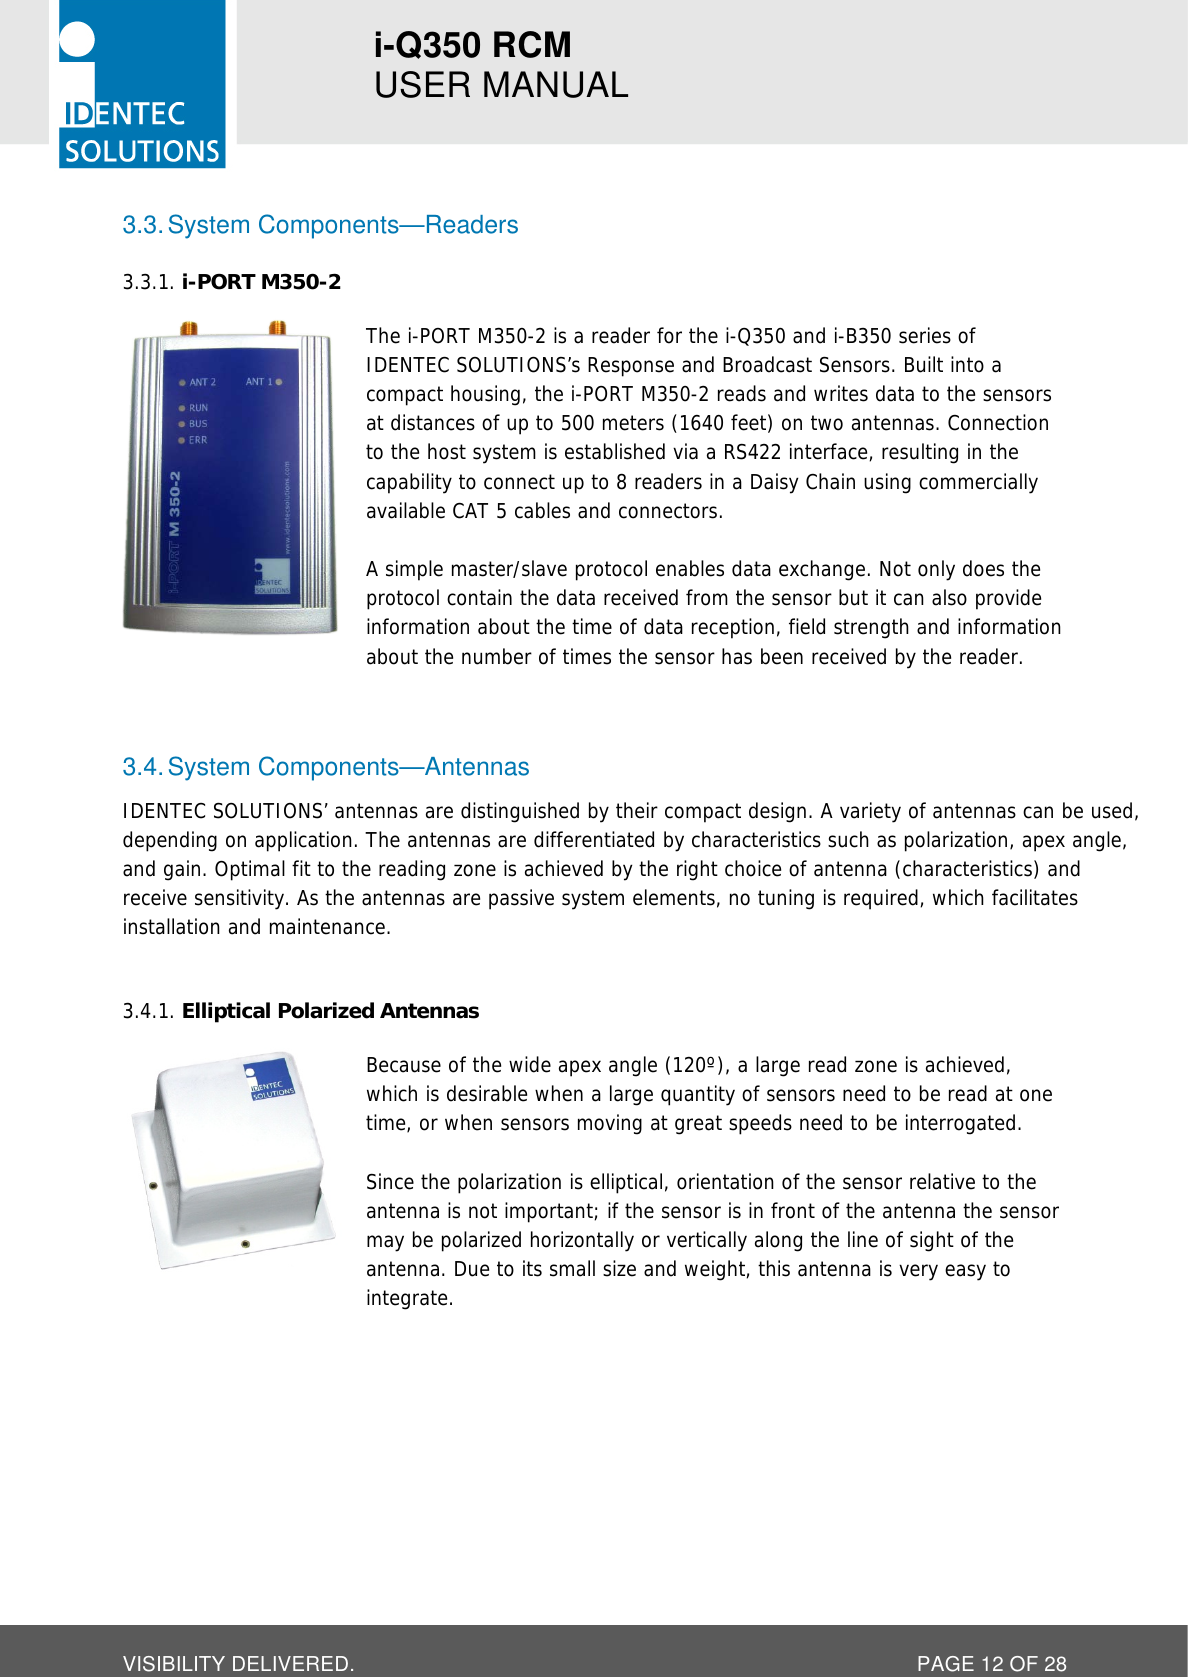 i-Q350 RCM   USER MANUAL  VISIBILITY DELIVERED.  PAGE 12 OF 28 3.3. System Components—Readers  i-PORT M350-2 3.3.1. The i-PORT M350-2 is a reader for the i-Q350 and i-B350 series of IDENTEC SOLUTIONS’s Response and Broadcast Sensors. Built into a compact housing, the i-PORT M350-2 reads and writes data to the sensors at distances of up to 500 meters (1640 feet) on two antennas. Connection to the host system is established via a RS422 interface, resulting in the capability to connect up to 8 readers in a Daisy Chain using commercially available CAT 5 cables and connectors.  A simple master/slave protocol enables data exchange. Not only does the protocol contain the data received from the sensor but it can also provide information about the time of data reception, field strength and information about the number of times the sensor has been received by the reader.   3.4. System Components—Antennas IDENTEC SOLUTIONS’ antennas are distinguished by their compact design. A variety of antennas can be used, depending on application. The antennas are differentiated by characteristics such as polarization, apex angle, and gain. Optimal fit to the reading zone is achieved by the right choice of antenna (characteristics) and receive sensitivity. As the antennas are passive system elements, no tuning is required, which facilitates installation and maintenance.   Elliptical Polarized Antennas 3.4.1. Because of the wide apex angle (120º), a large read zone is achieved, which is desirable when a large quantity of sensors need to be read at one time, or when sensors moving at great speeds need to be interrogated.  Since the polarization is elliptical, orientation of the sensor relative to the antenna is not important; if the sensor is in front of the antenna the sensor may be polarized horizontally or vertically along the line of sight of the antenna. Due to its small size and weight, this antenna is very easy to integrate.    